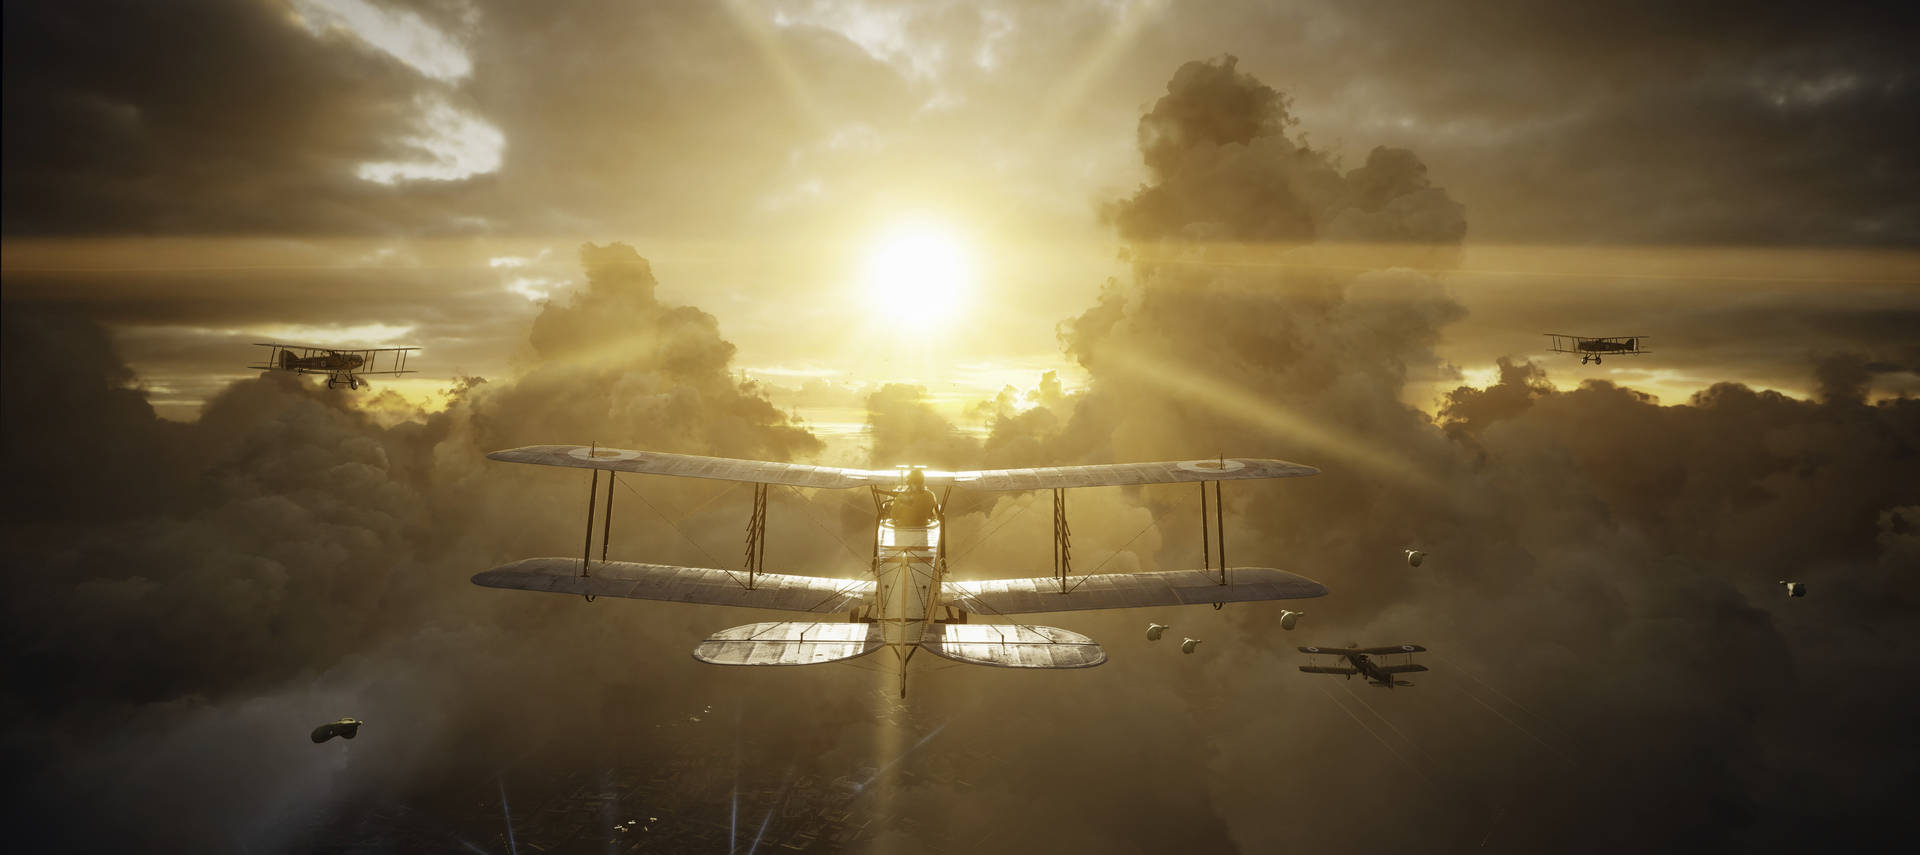 Awesome 4k Bf1 Fighter Wing Background